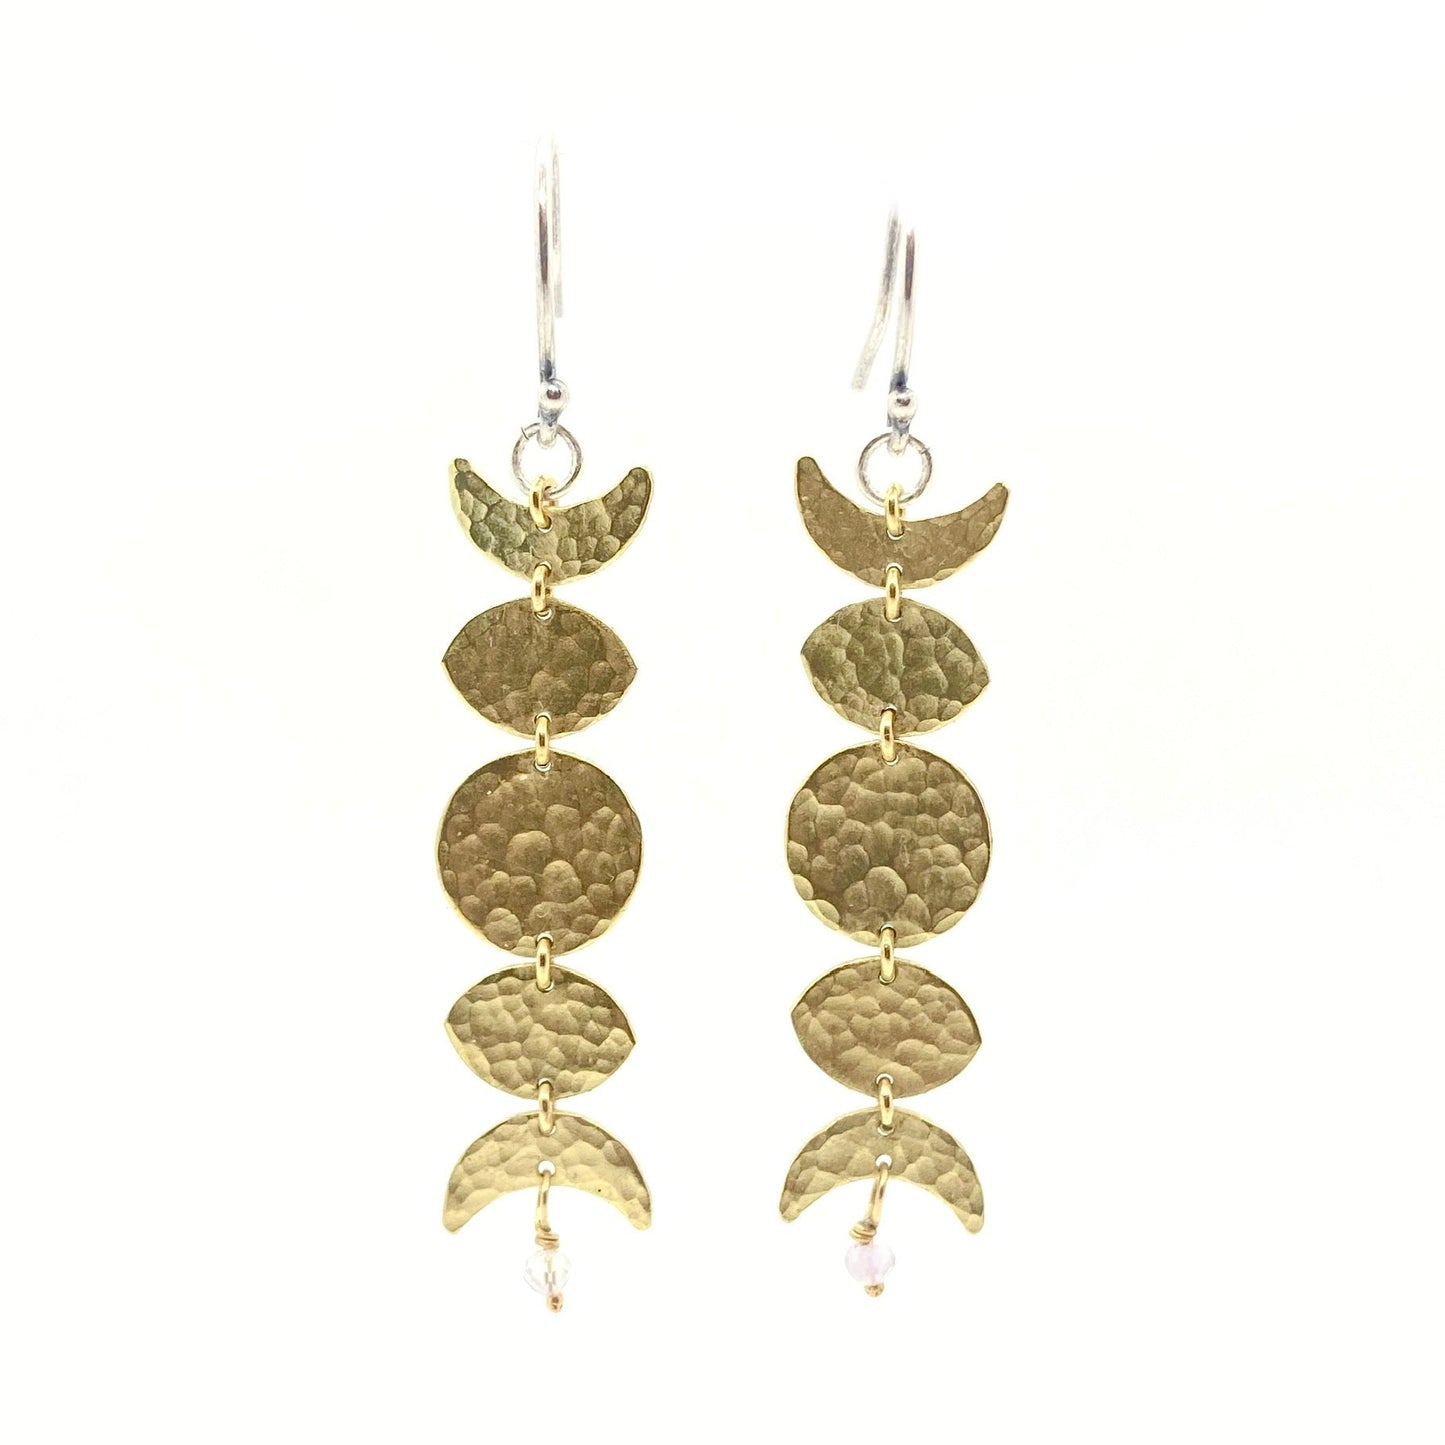 Moon Phase Earrings in Brass at Heal